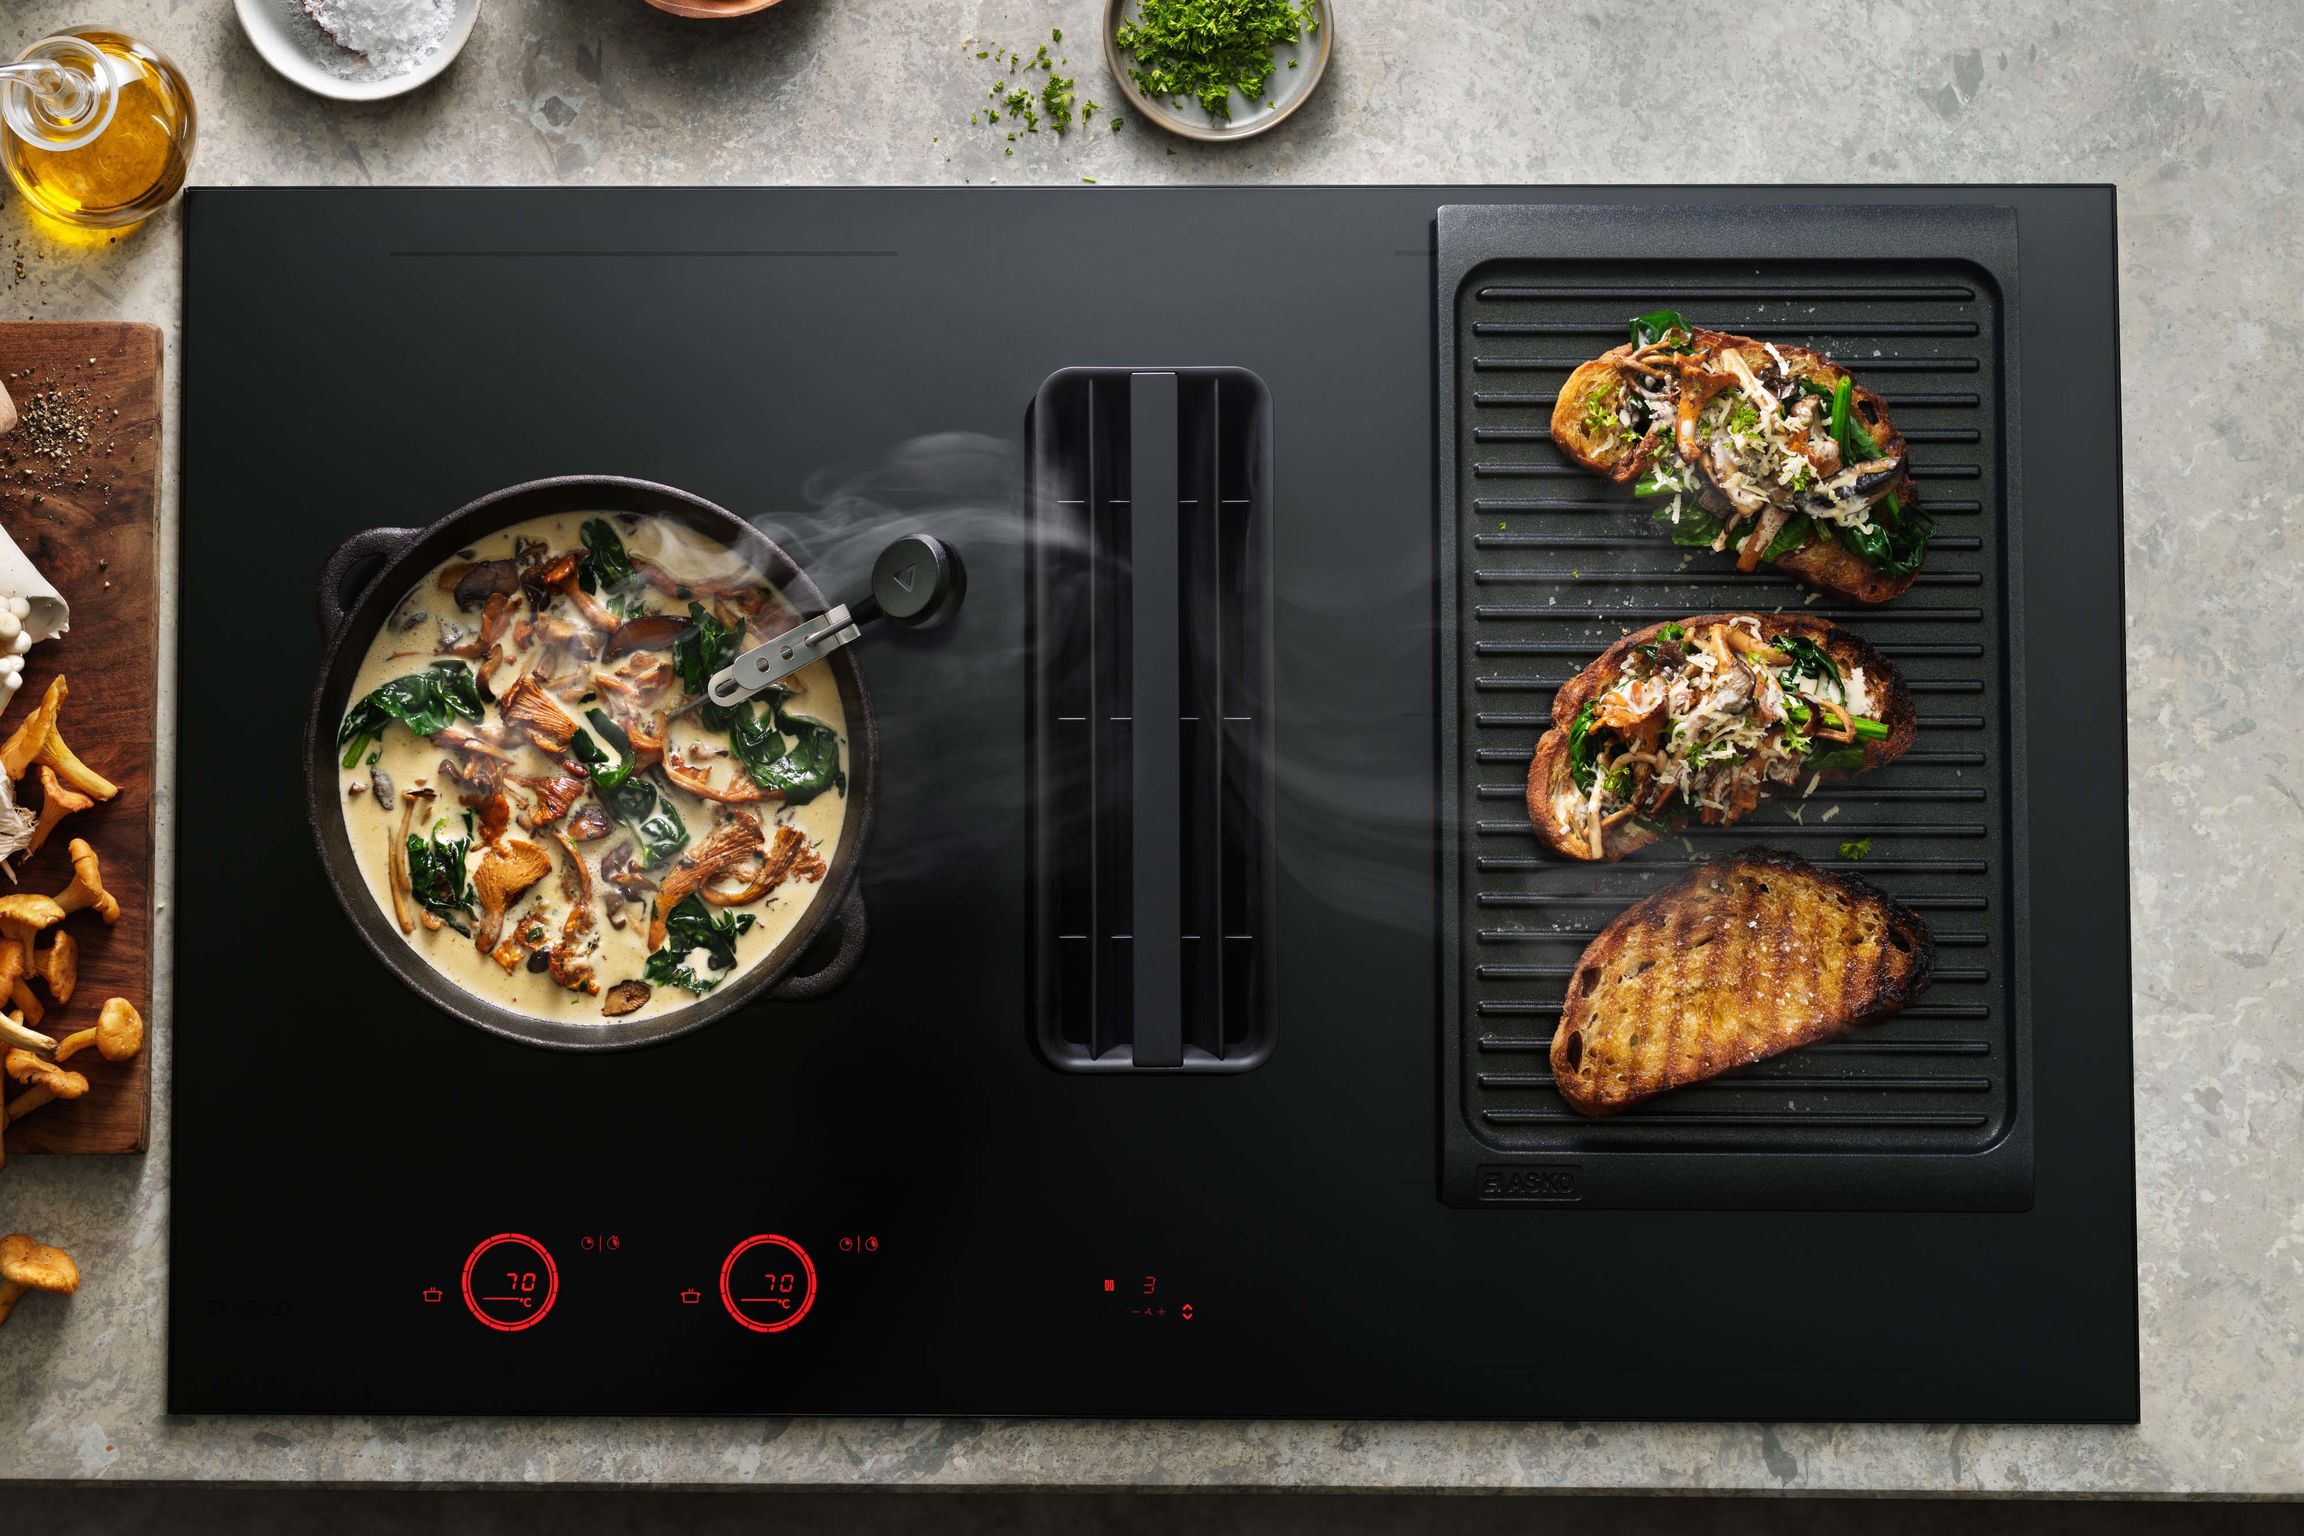 ASKO Elevate™ induction hobs with integrated extraction